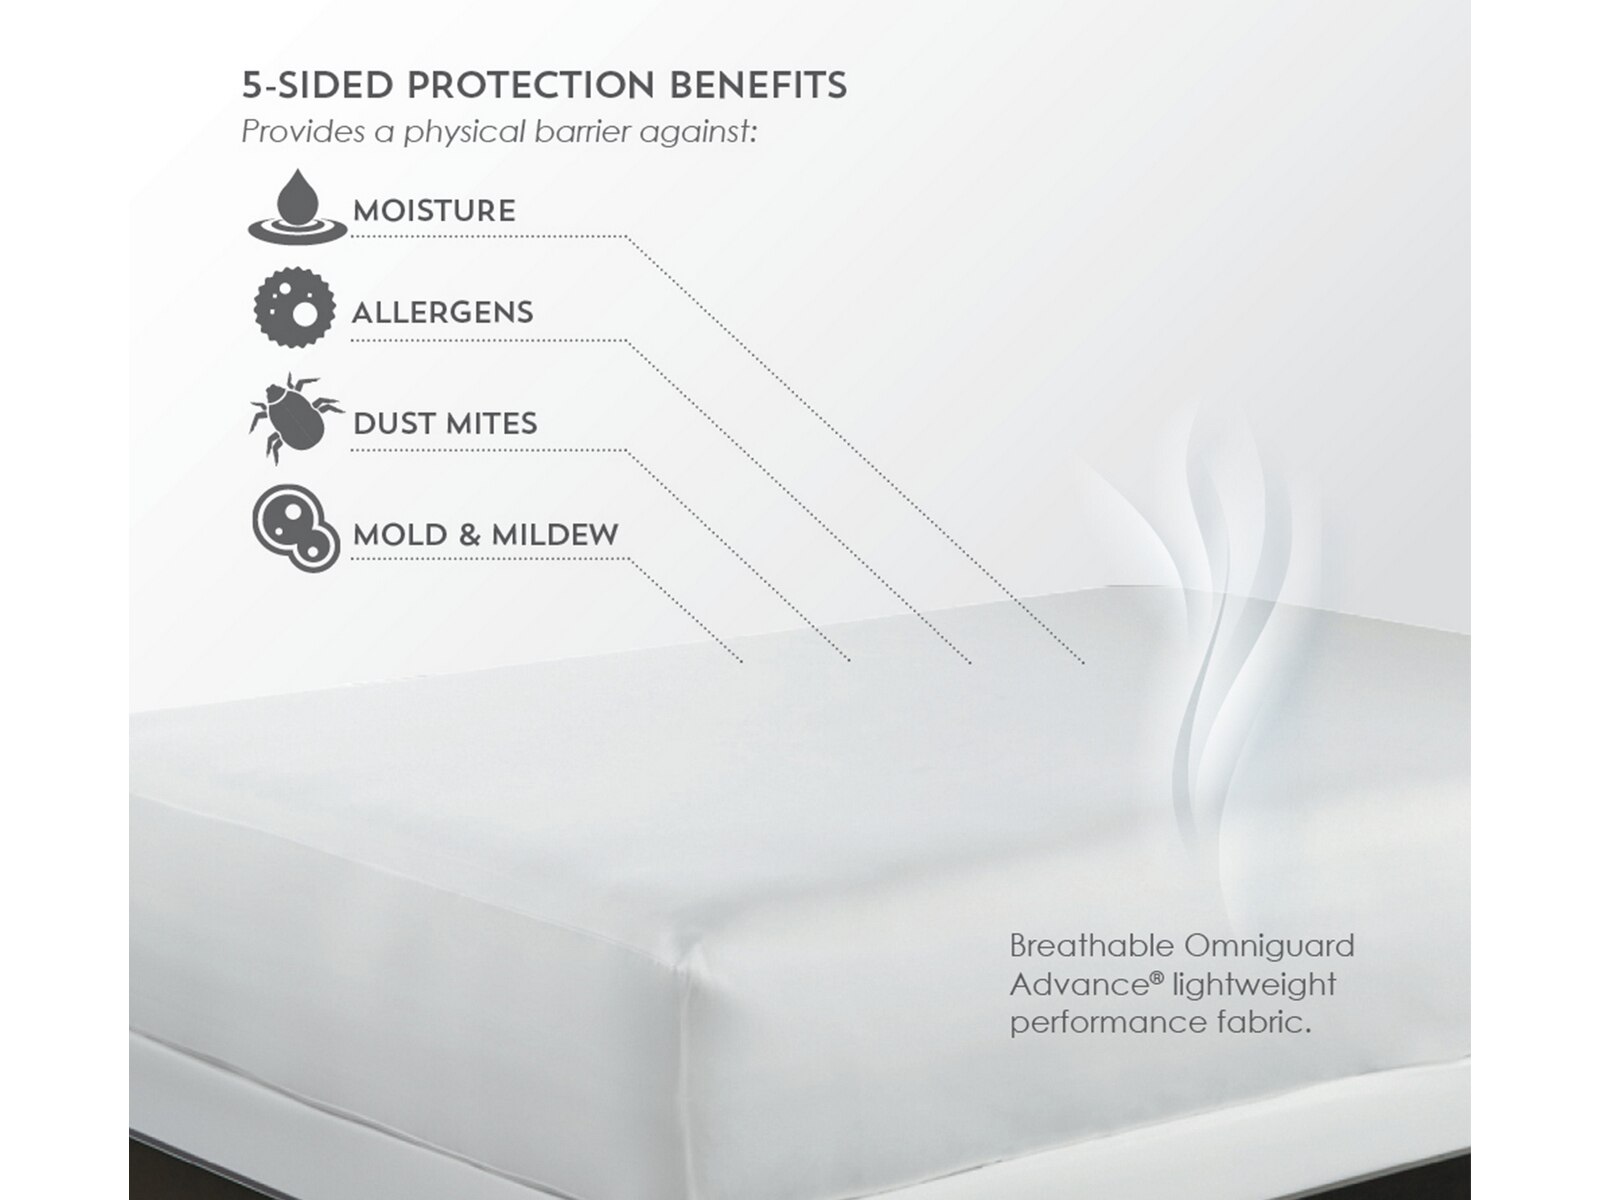 purecare 5 sided mattress protector washing instructions